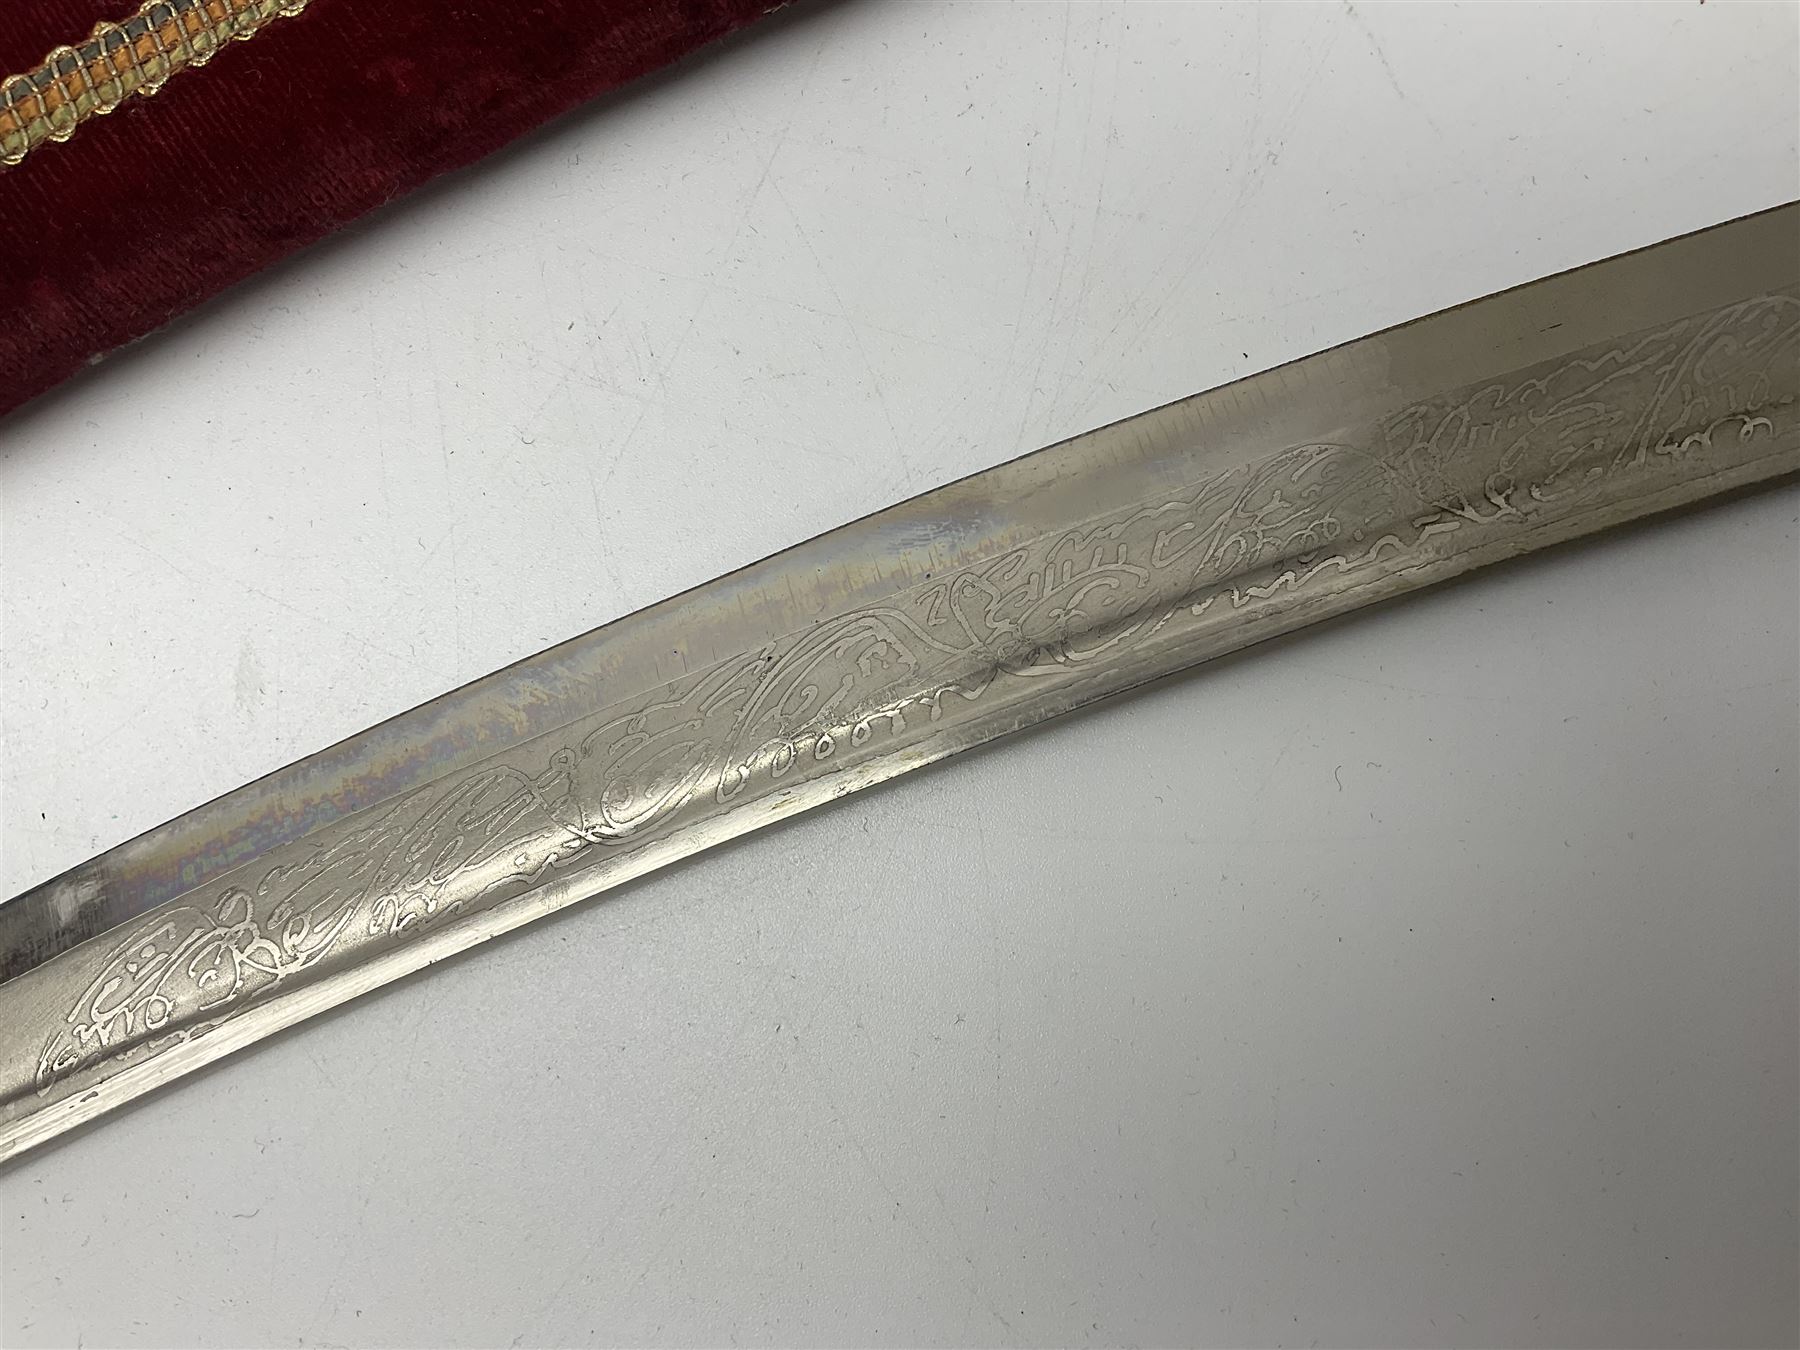 Late Victorian British Military gymnasium practice sword with 85.5cm fullered blunt pointed narrow s - Image 11 of 44